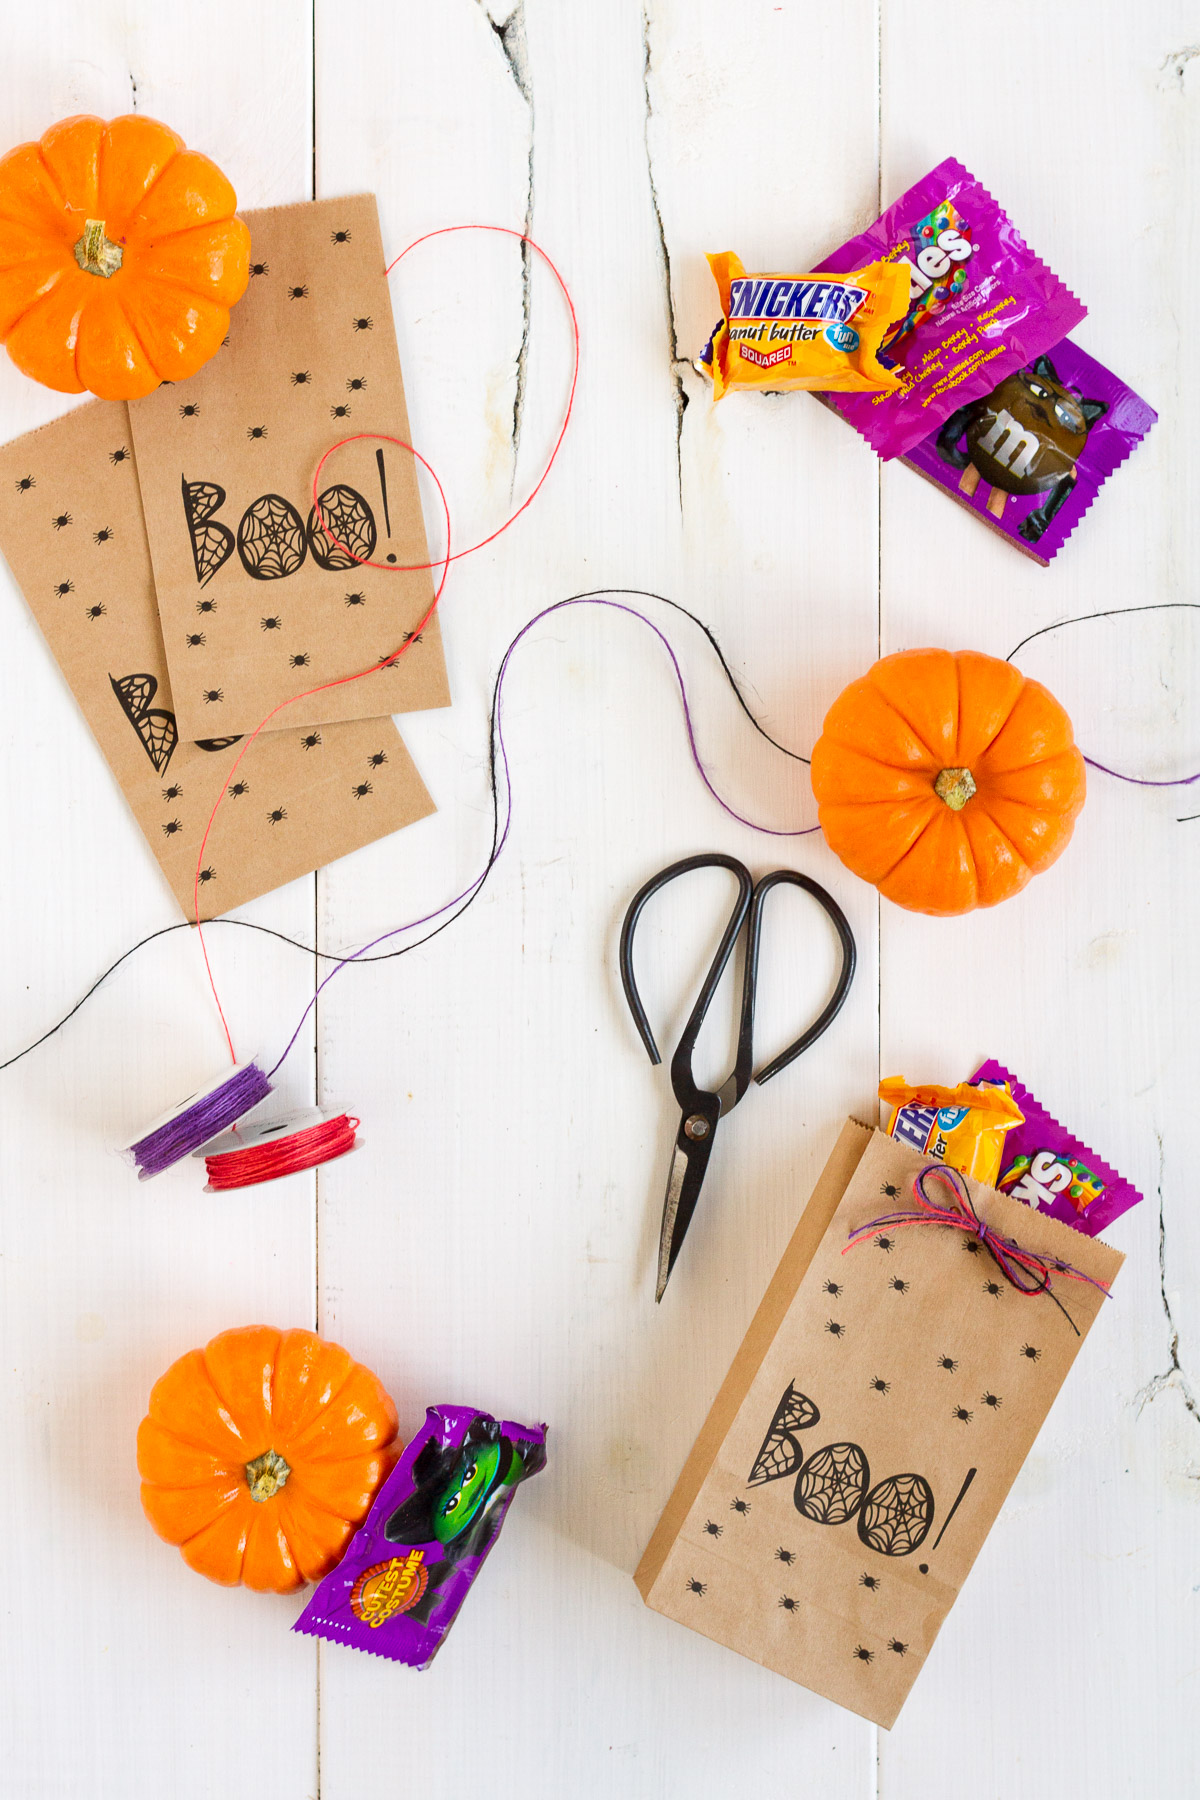 These free printable halloween treat bags are an easy and festive DIY!